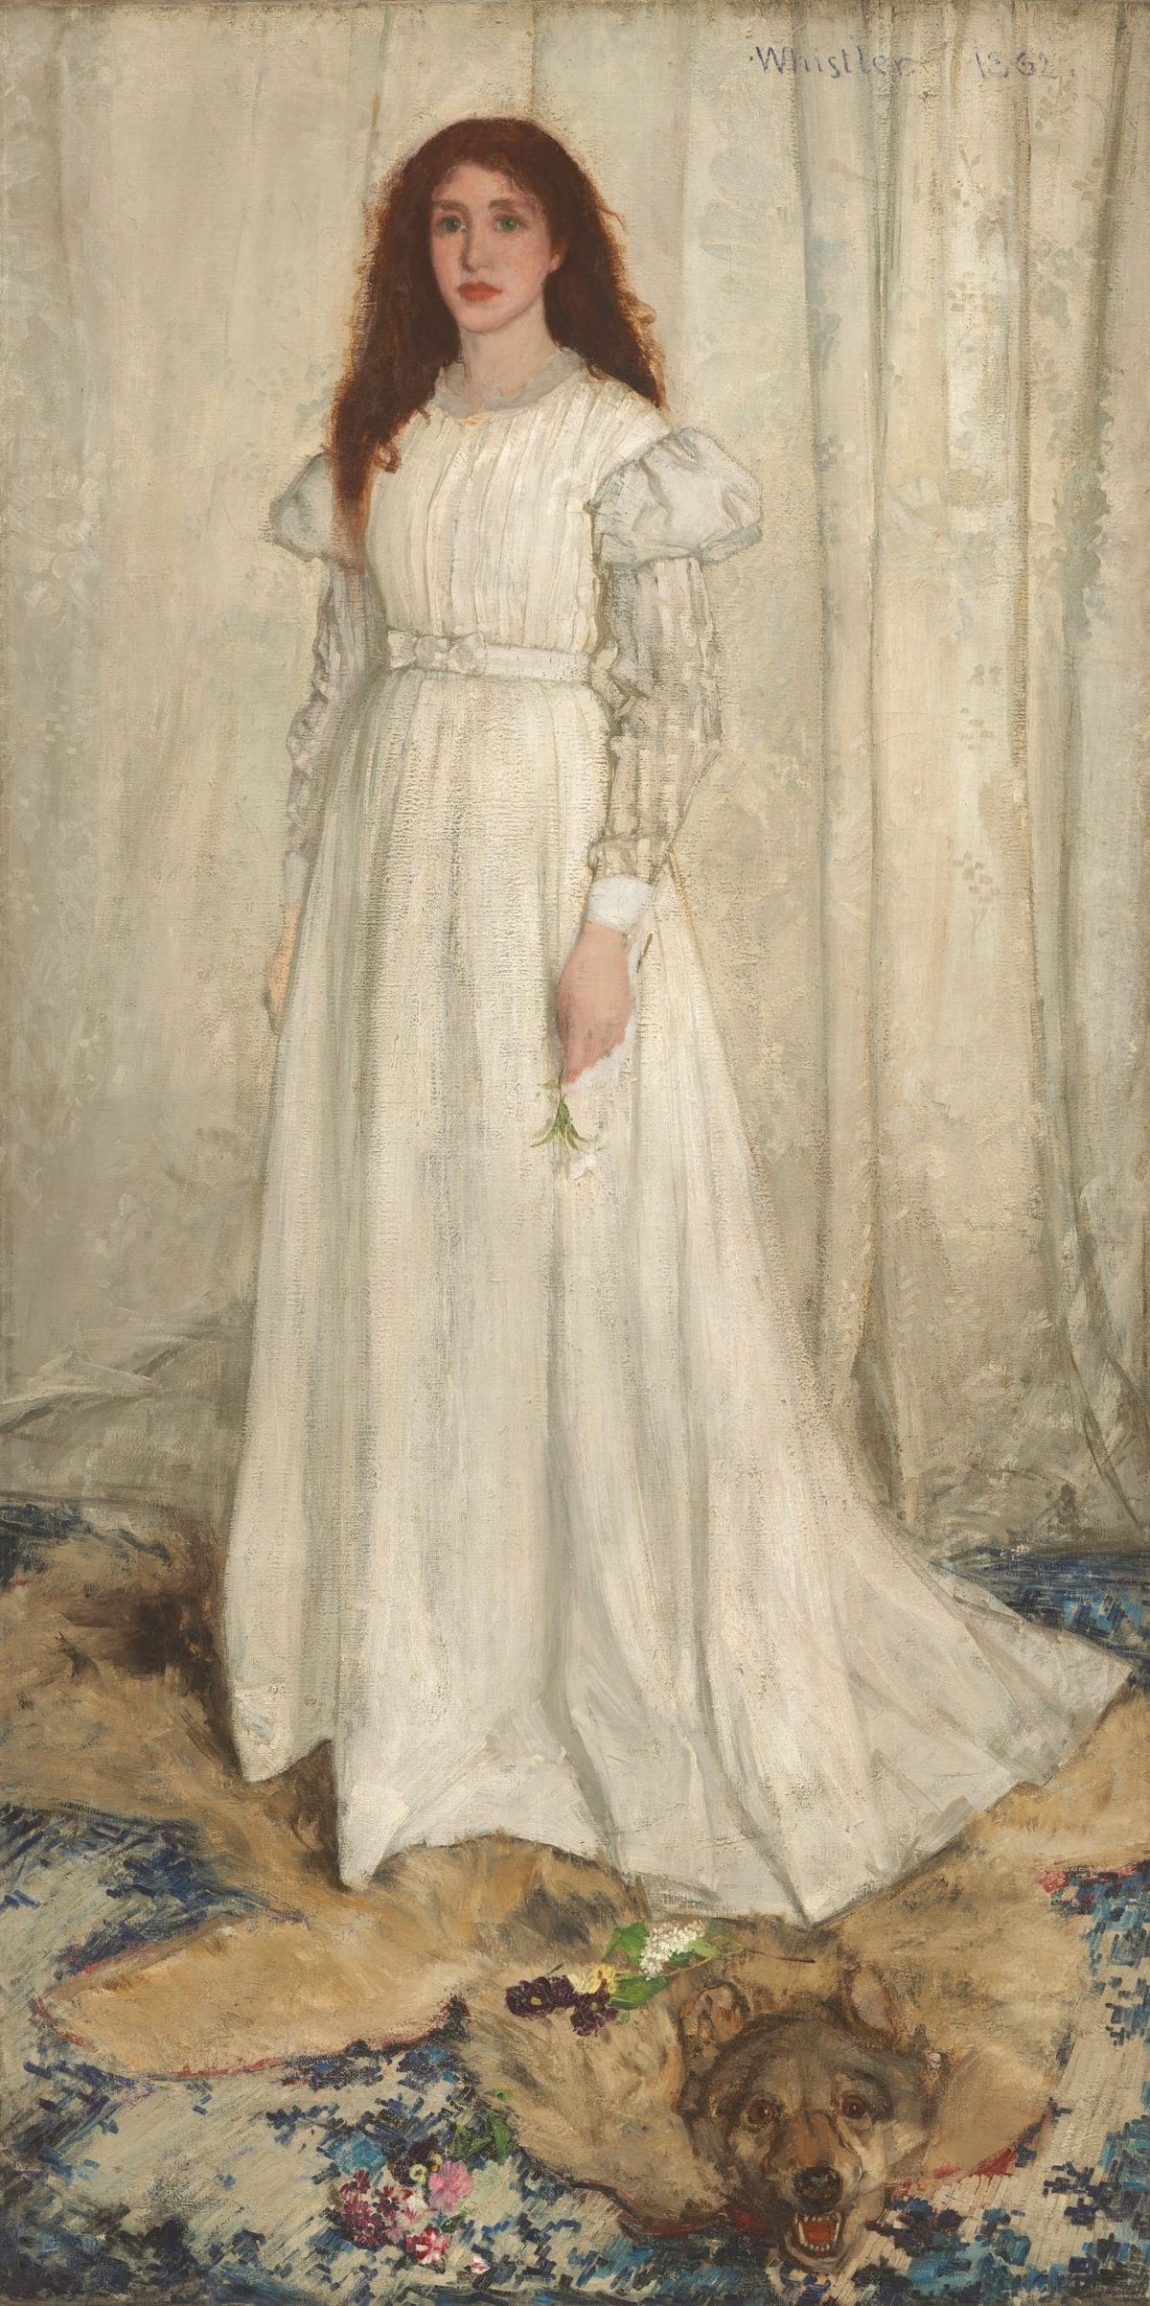 Whistler James Symphony in White no 1 (The White Girl) 1862 scaled